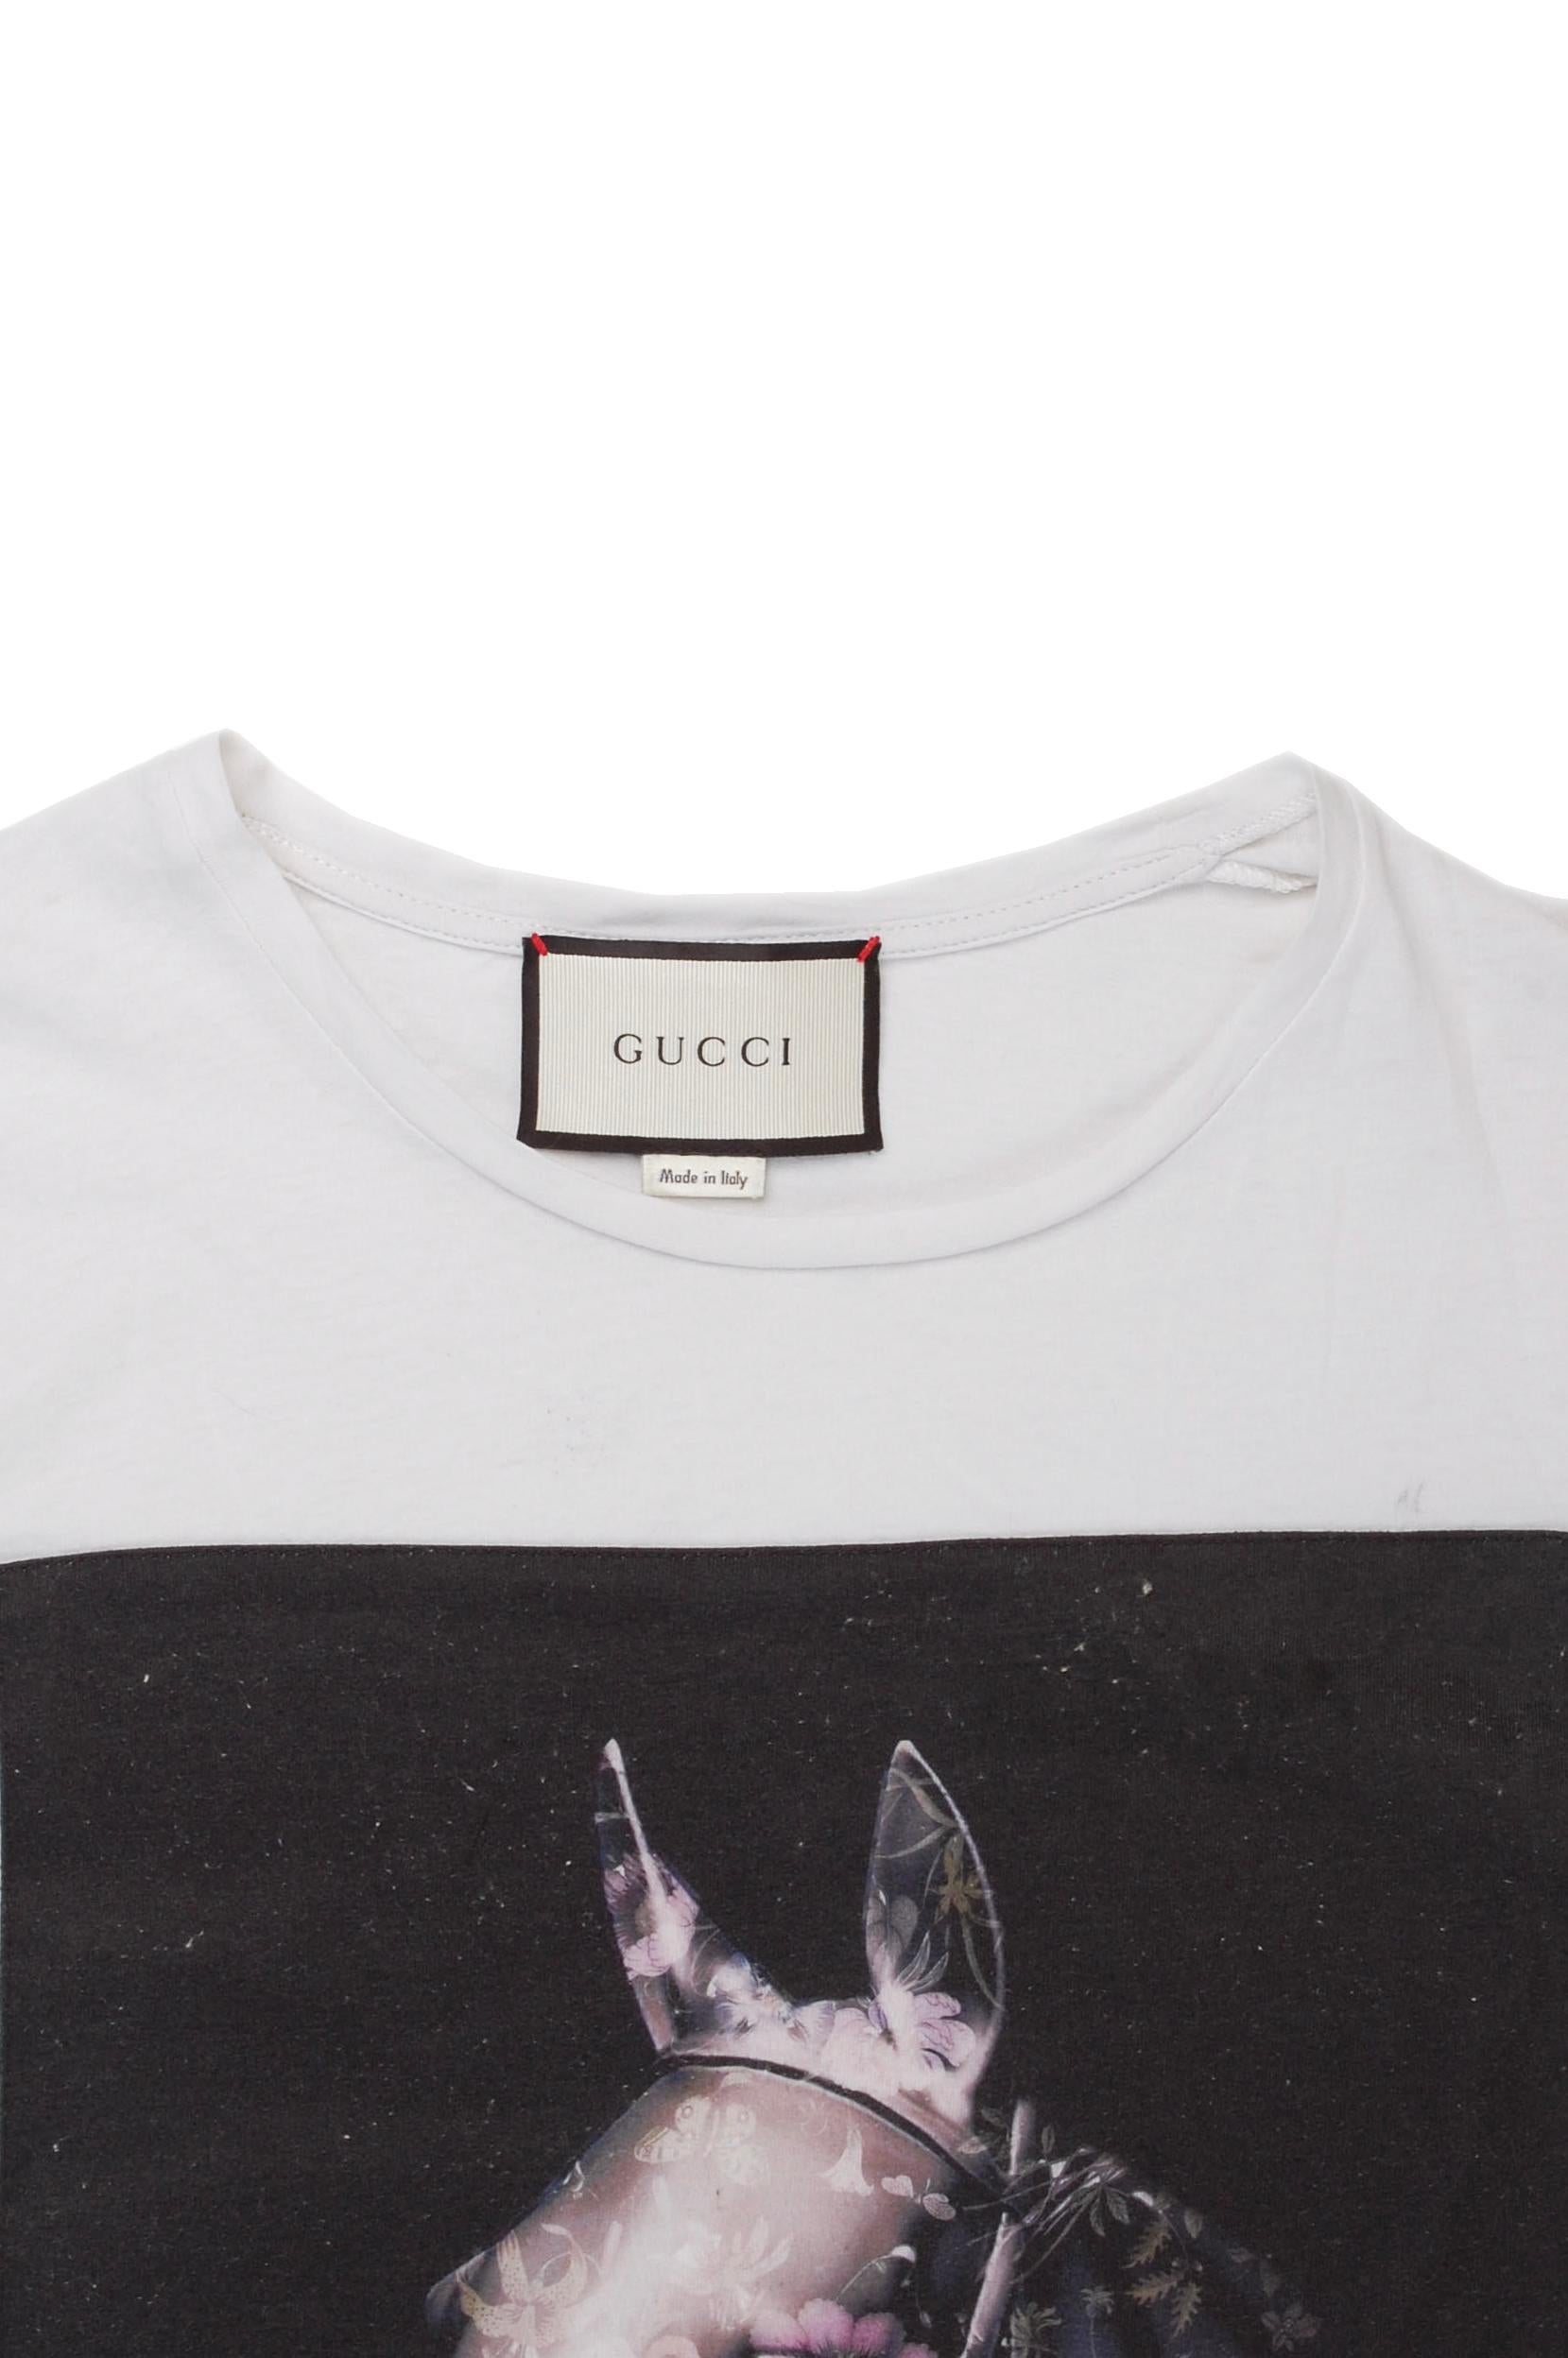 Item for sale is 100% genuine Gucci Horse Print Men T-Shirt 
Color: White
(An actual color may a bit vary due to individual computer screen interpretation)
Material: Cotton, missing care label
Tag size: S runs Medium too
This t shirt is great